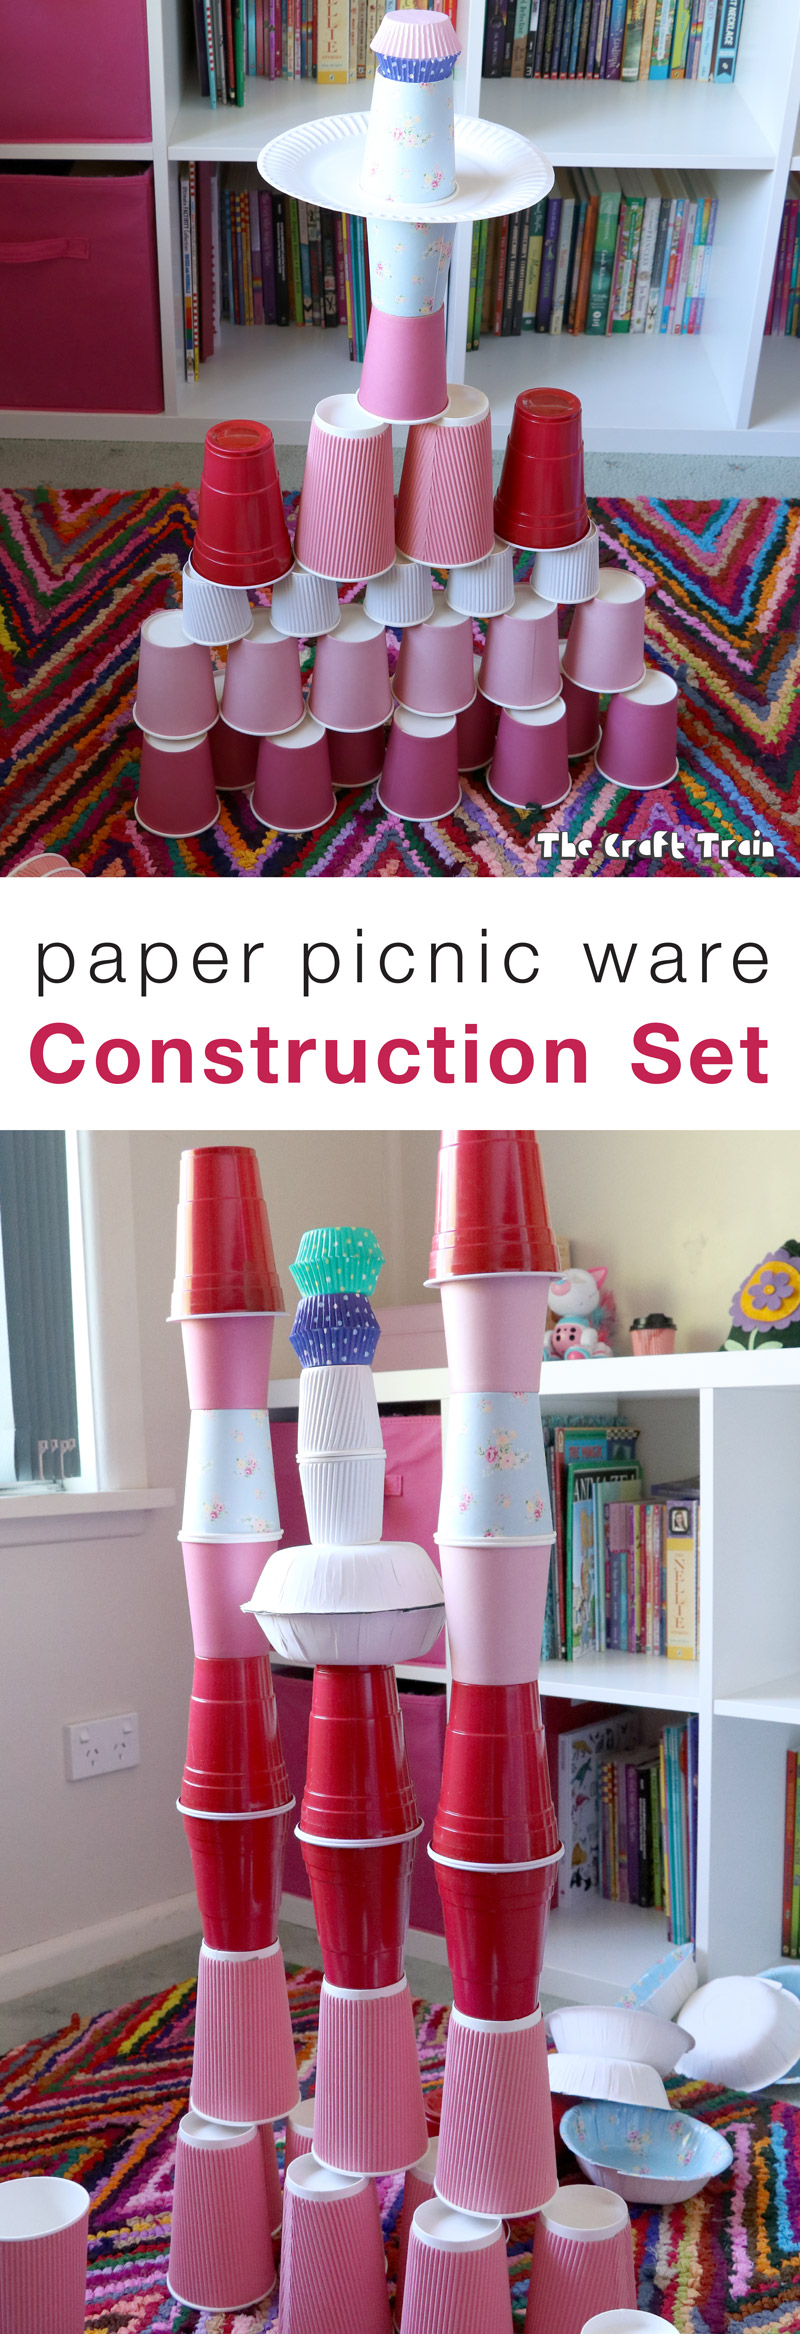 Make a construction set using paper picnic ware like cups, plates and cupcake liners